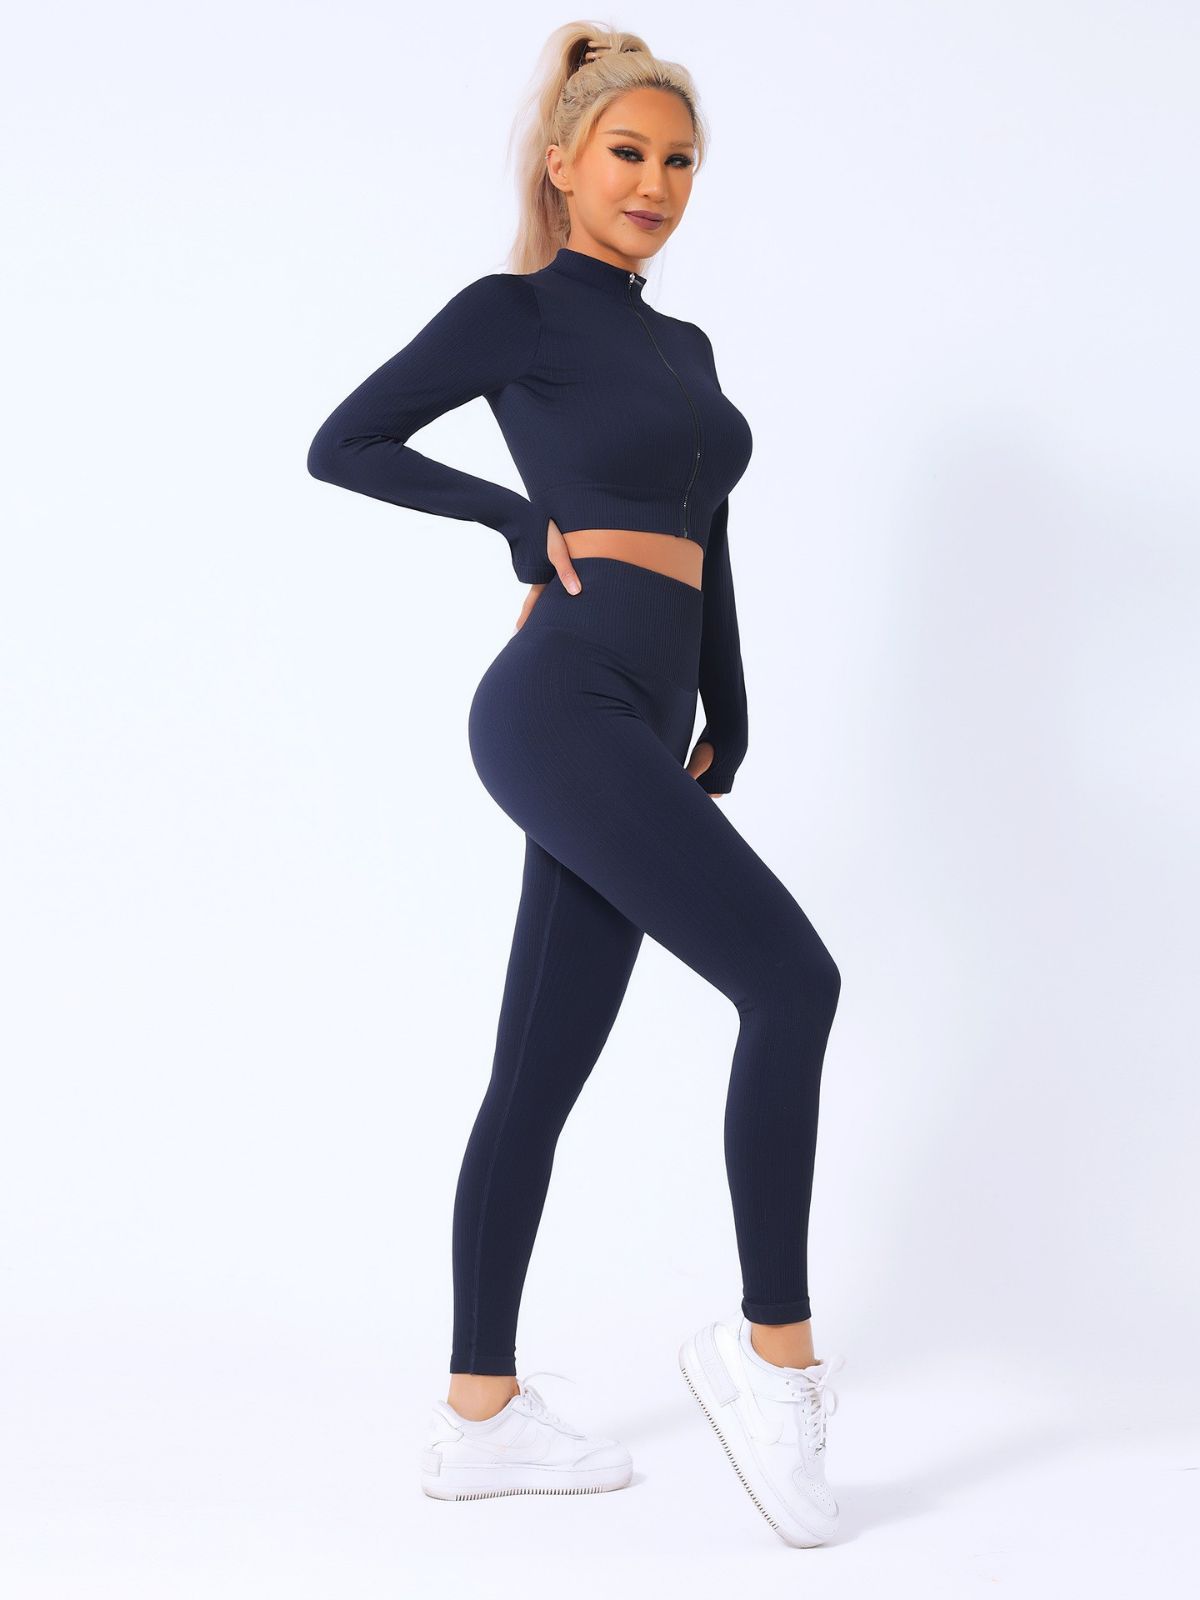 European and American Quick-Drying Fitness Exercise Yoga Clothes Suit Women's Long-Sleeve Zipper Workout Clothes Top Abdominal-Shaping High Waist Yoga Pants